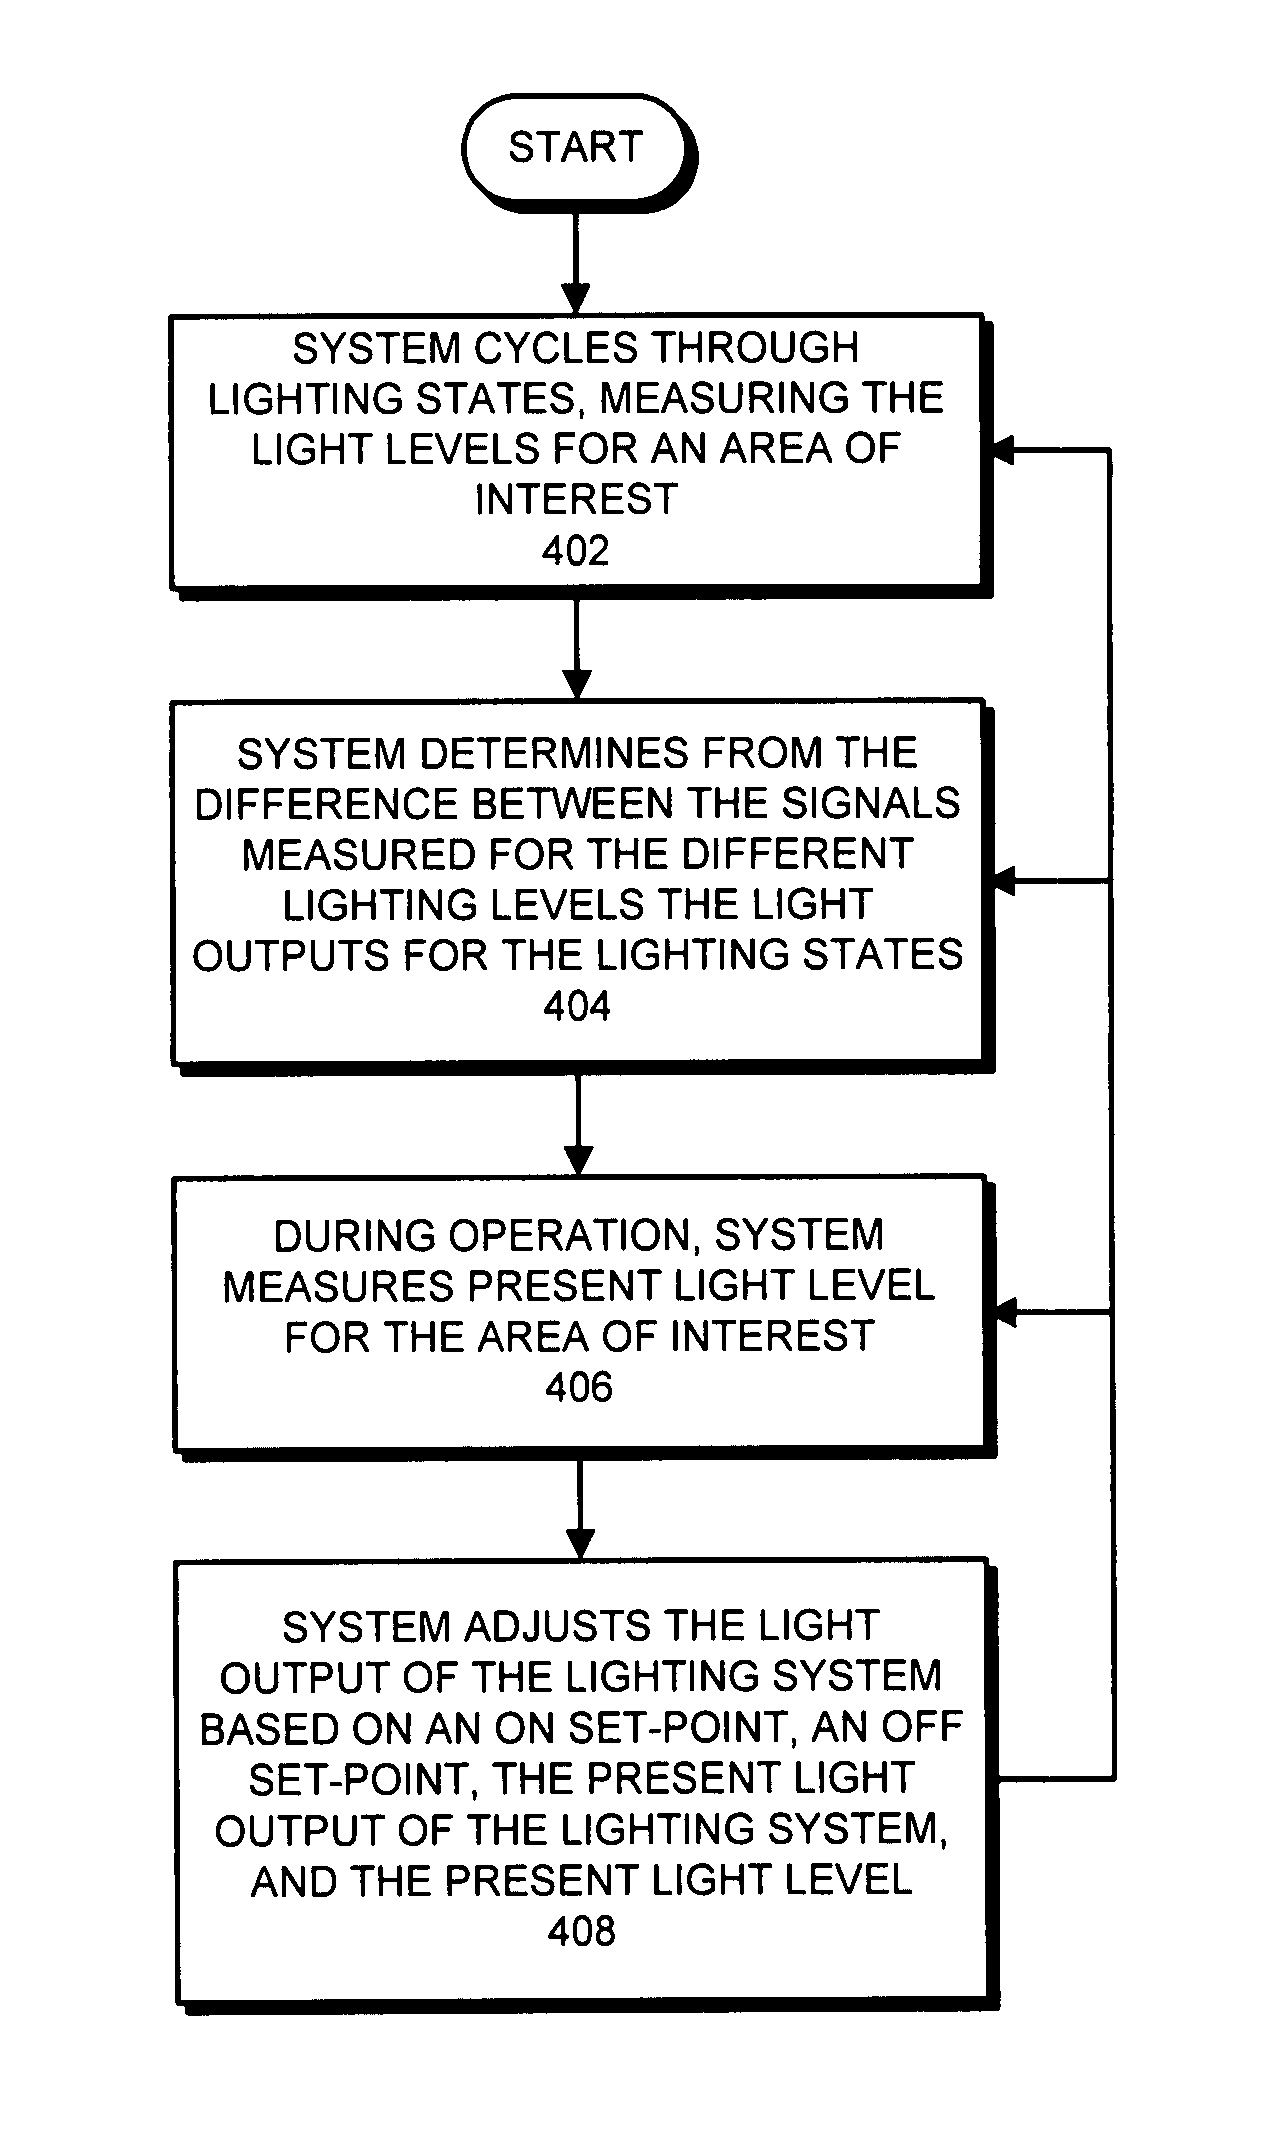 Method for calibrating a lighting control system that facilitates daylight harvesting